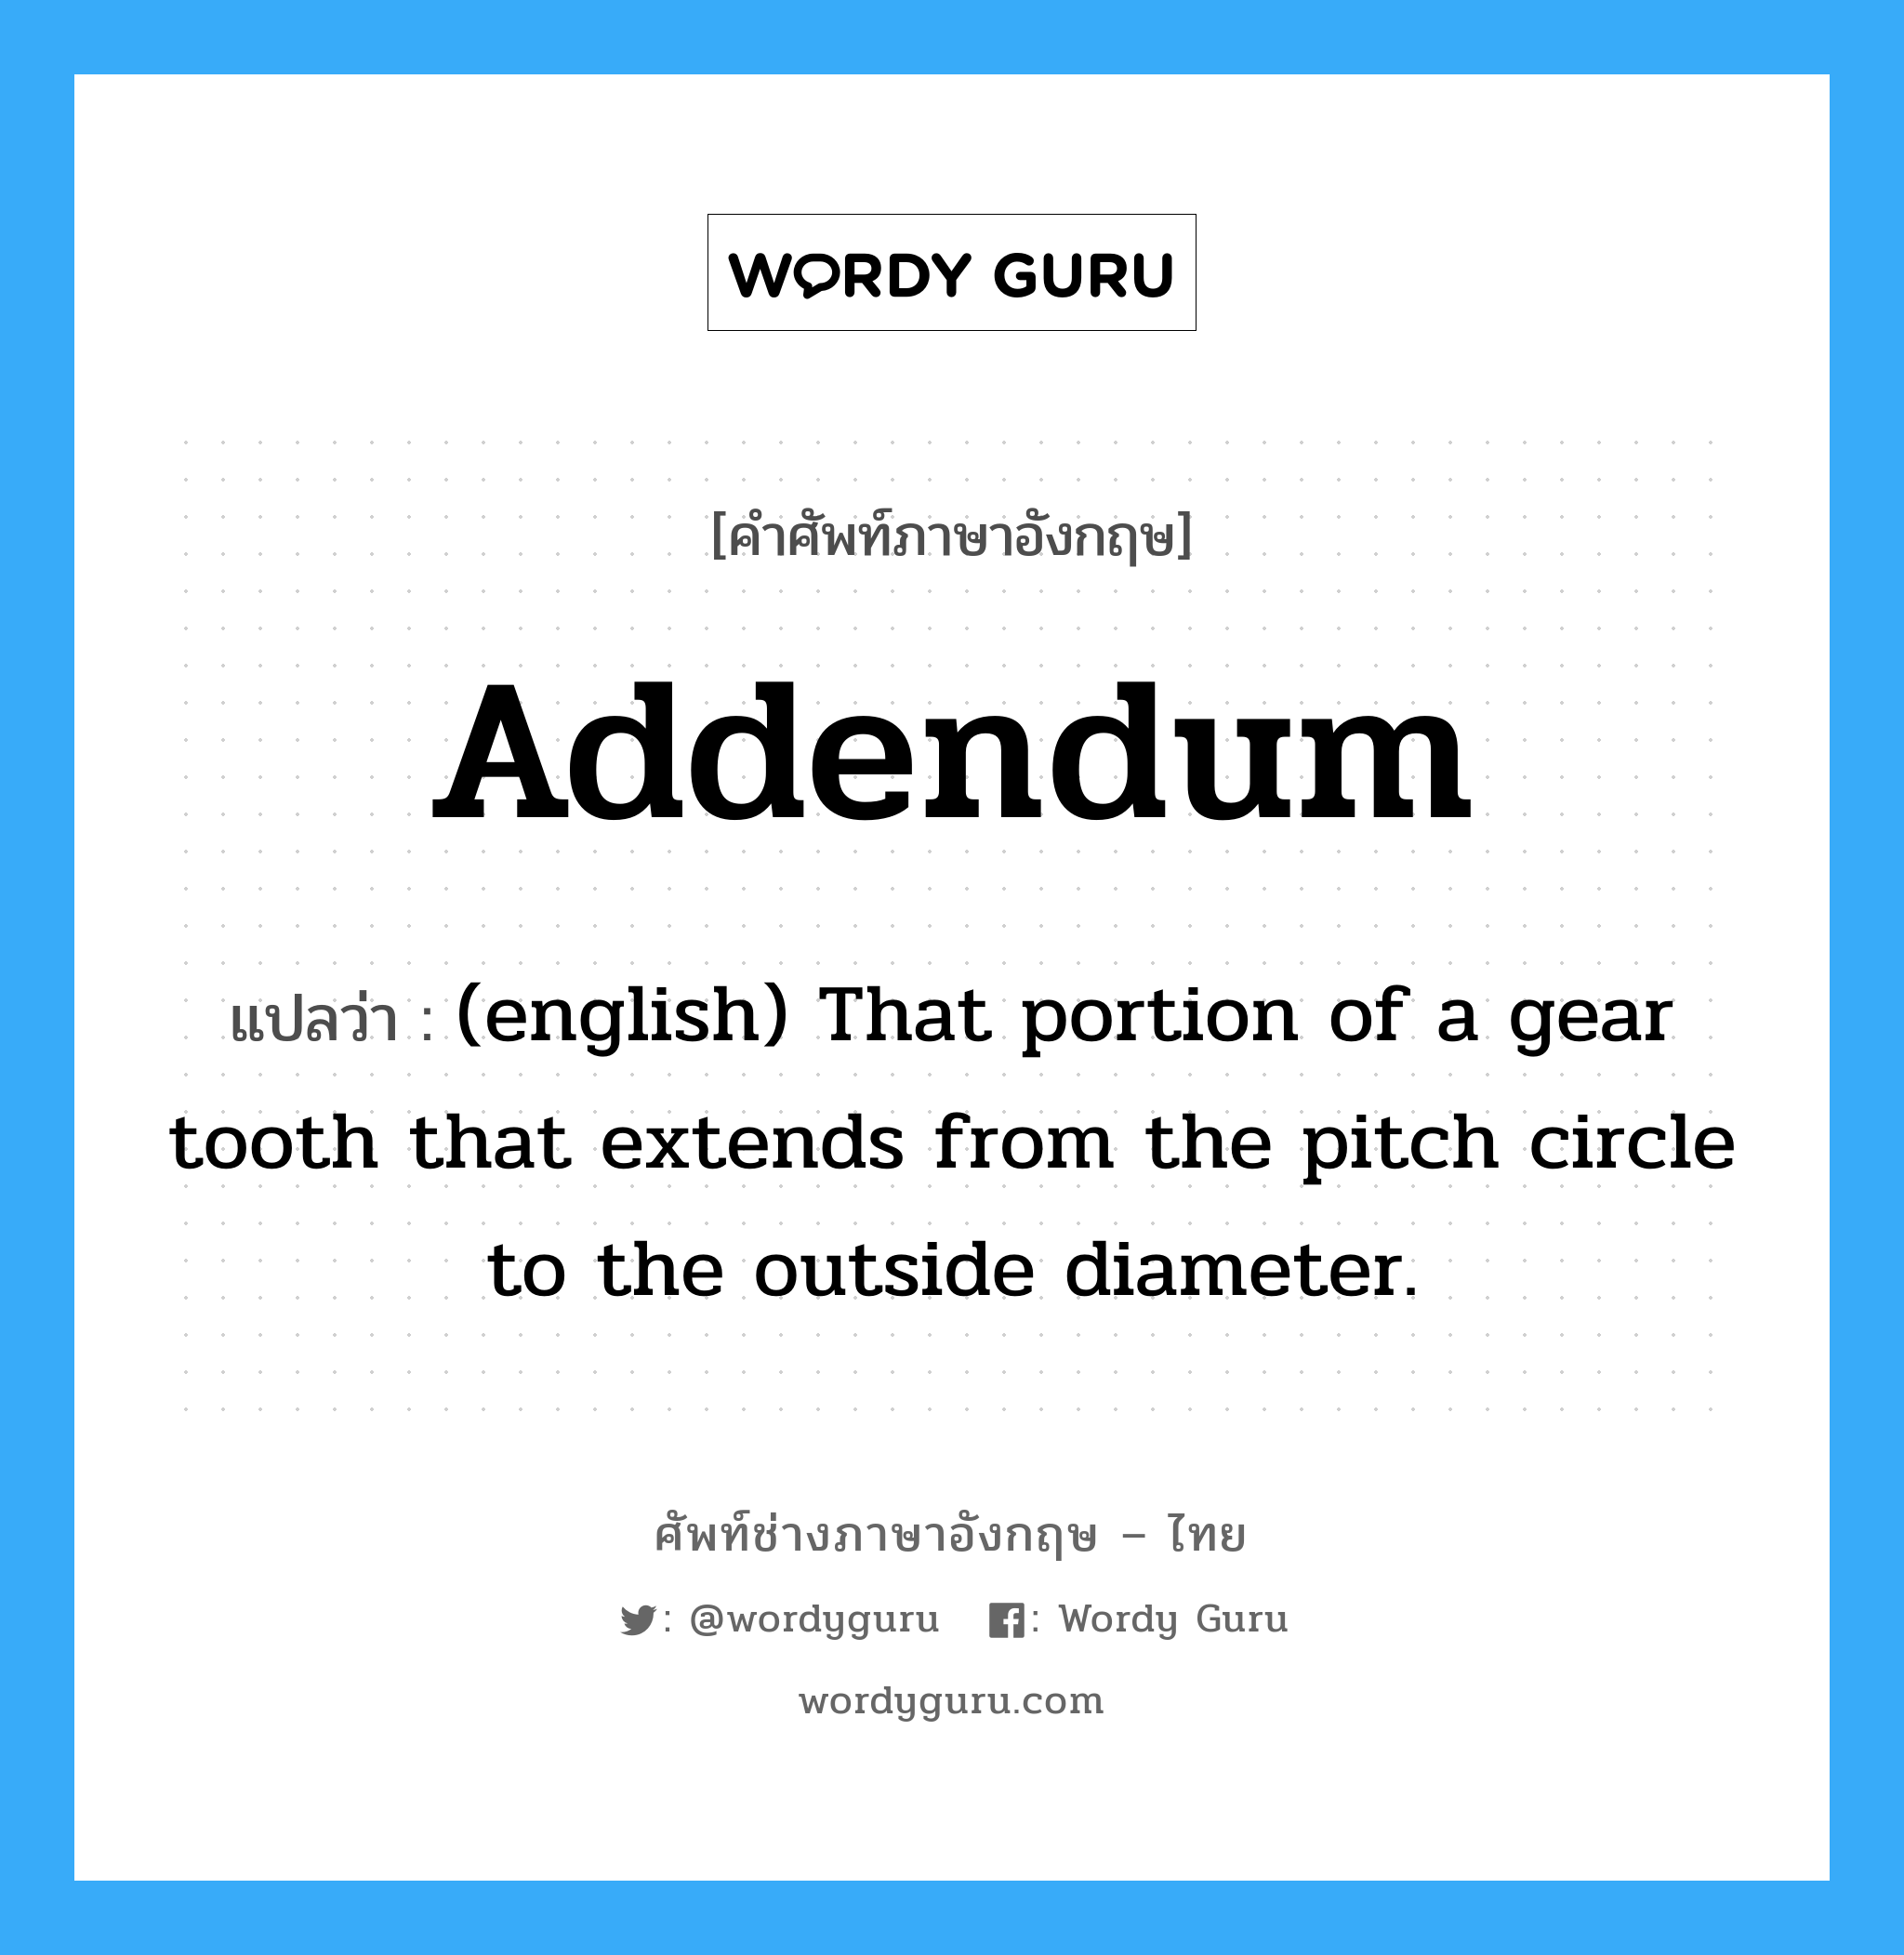 Addendum แปลว่า?, คำศัพท์ช่างภาษาอังกฤษ - ไทย Addendum คำศัพท์ภาษาอังกฤษ Addendum แปลว่า (english) That portion of a gear tooth that extends from the pitch circle to the outside diameter.